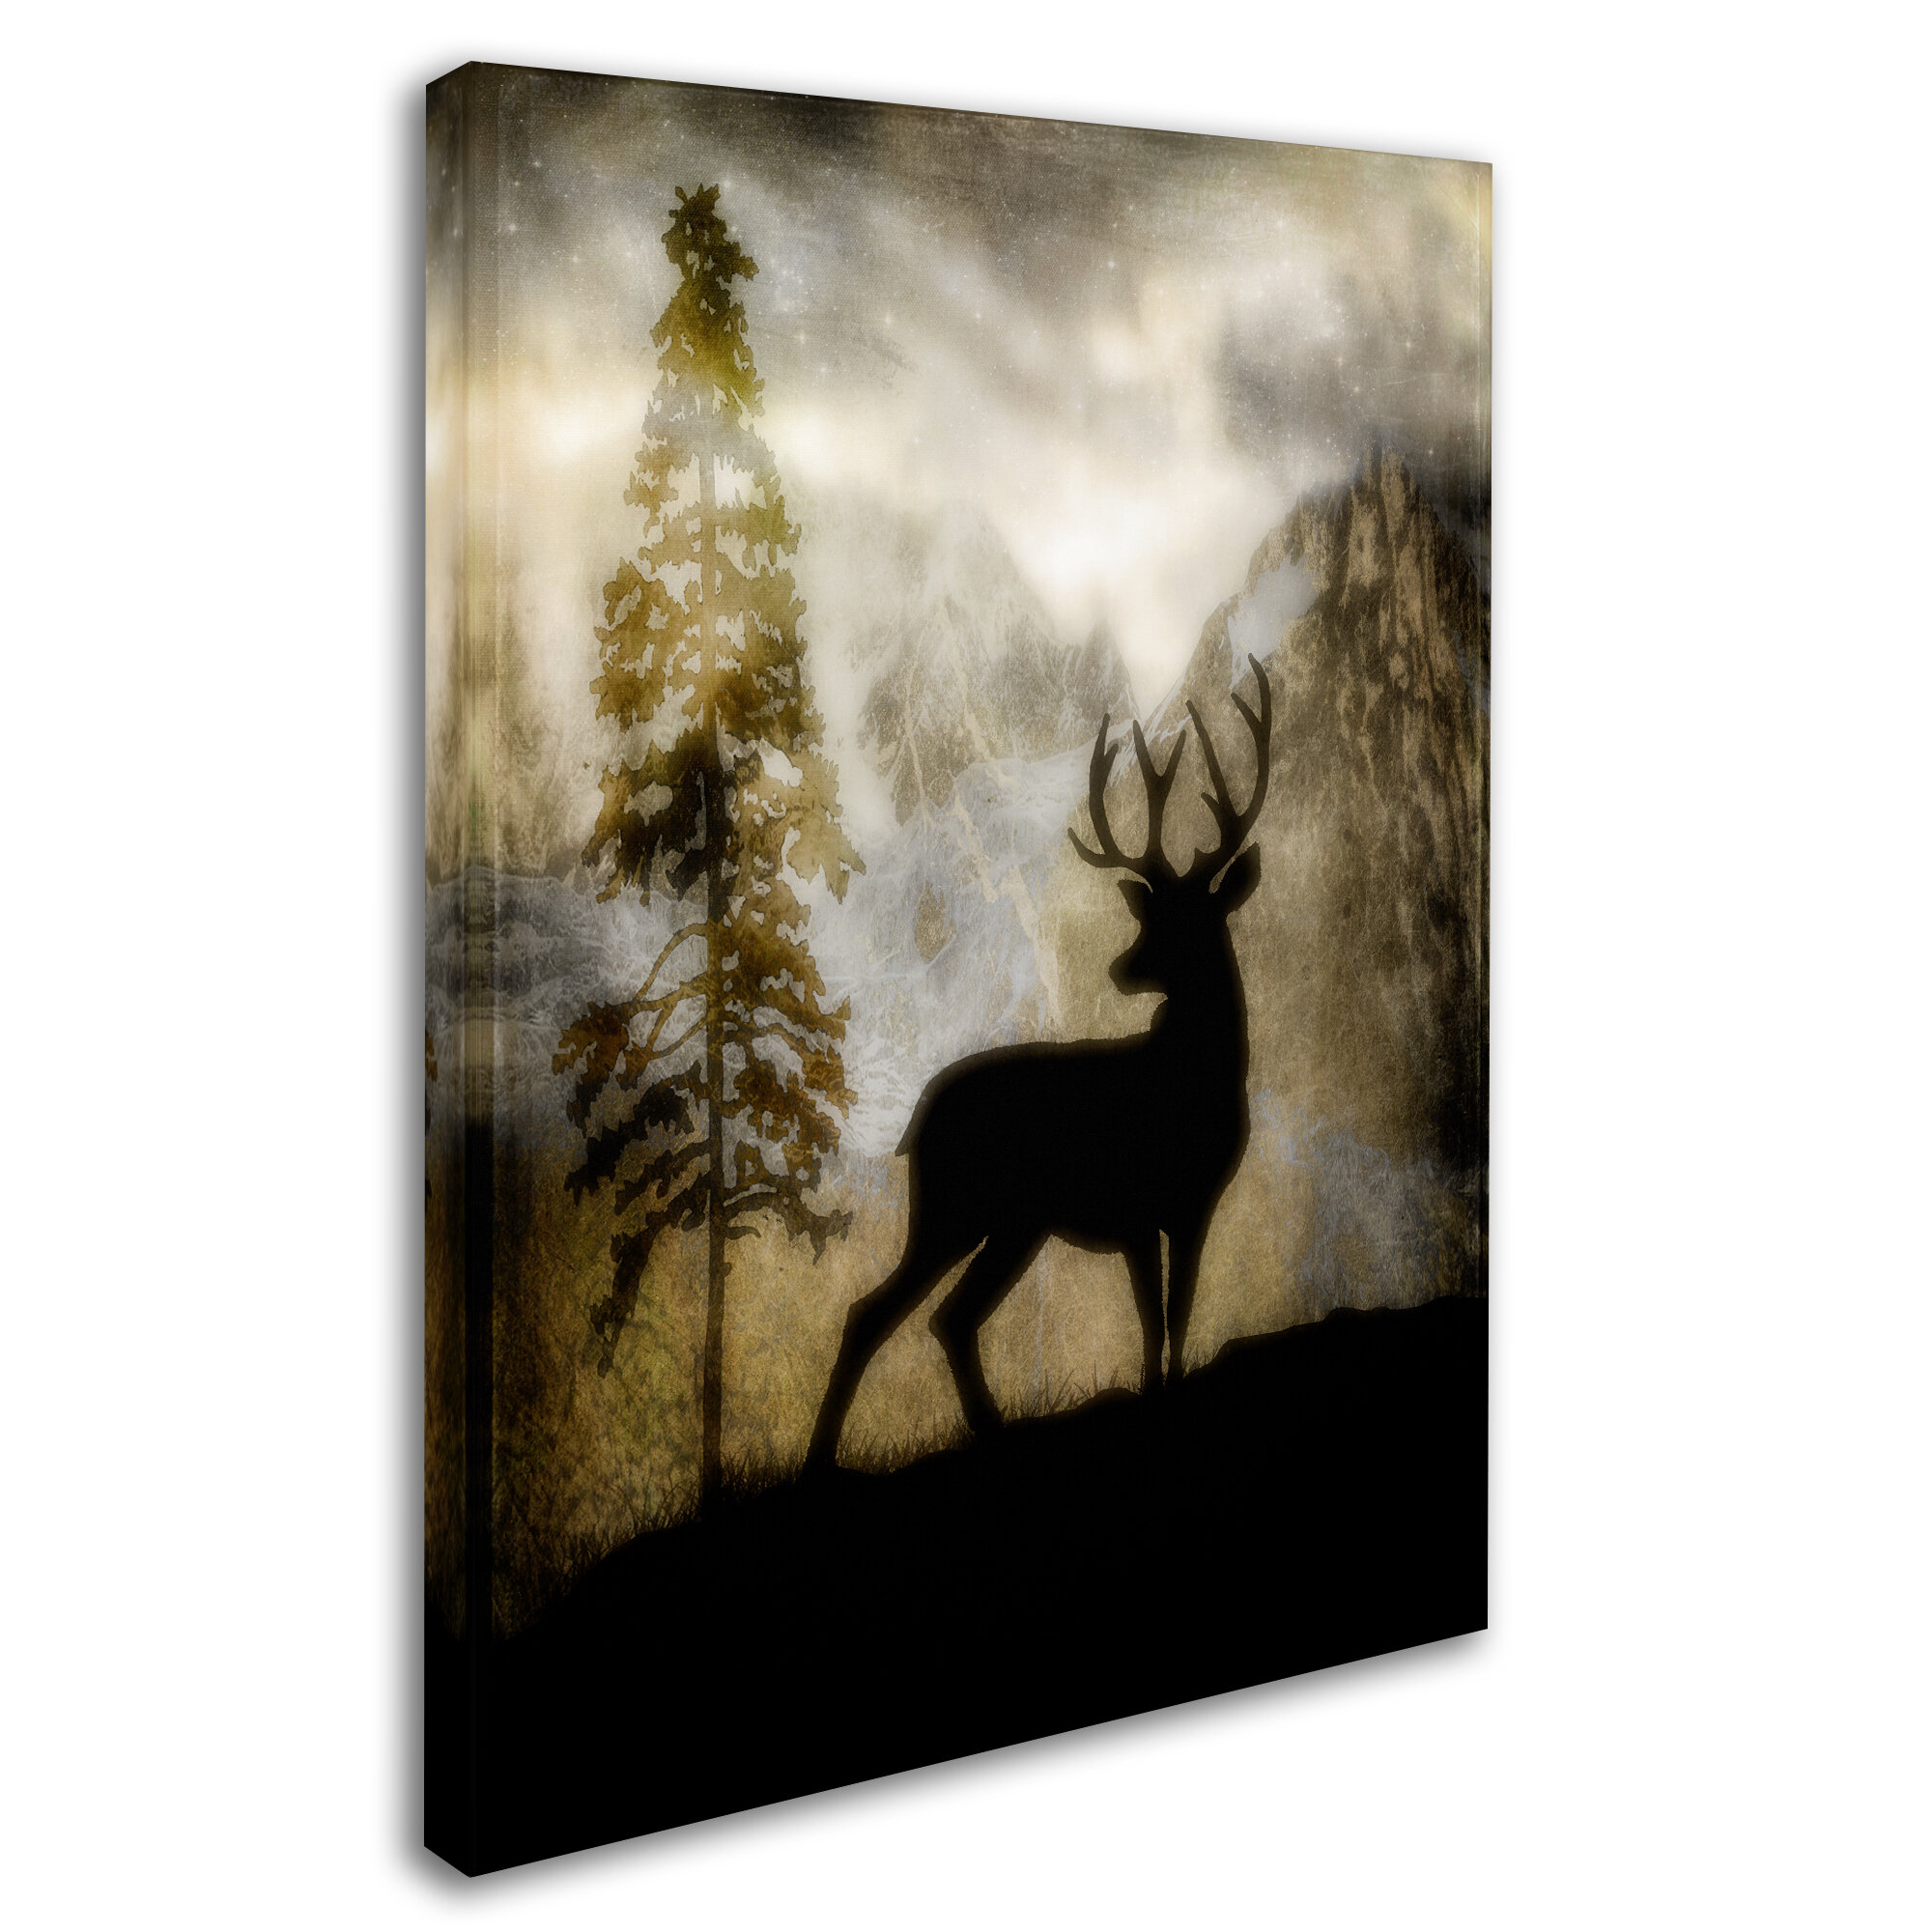 Smooth Deer Wall Painting, For Home Decor, Size: 10/8 at Rs 10000